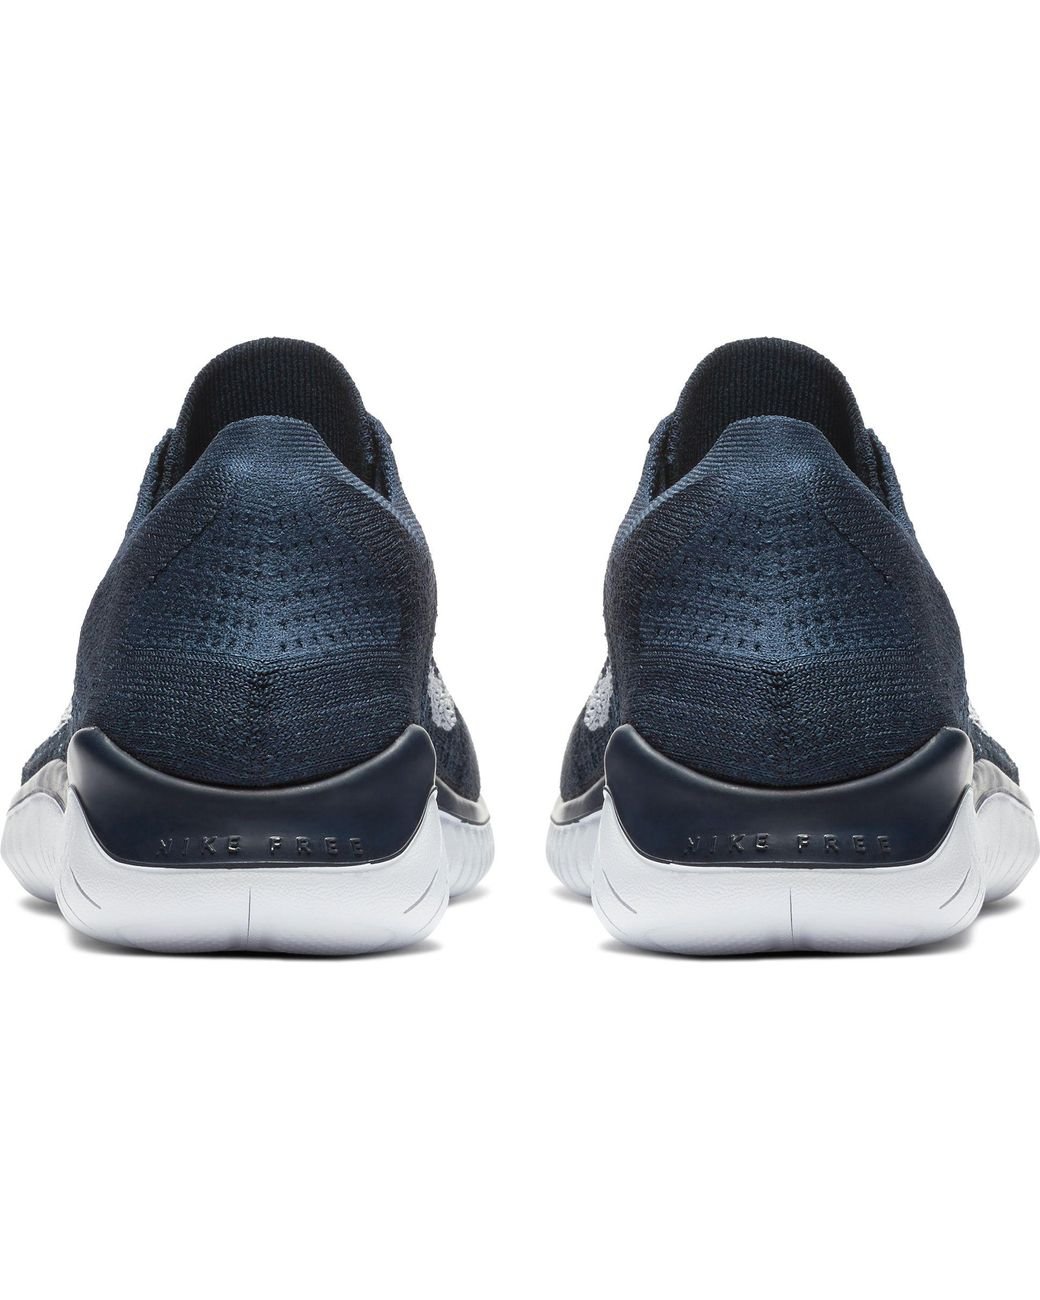 Nike Lace Free Rn Flyknit 2018 Running Shoes in Navy/White (Blue) for Men |  Lyst